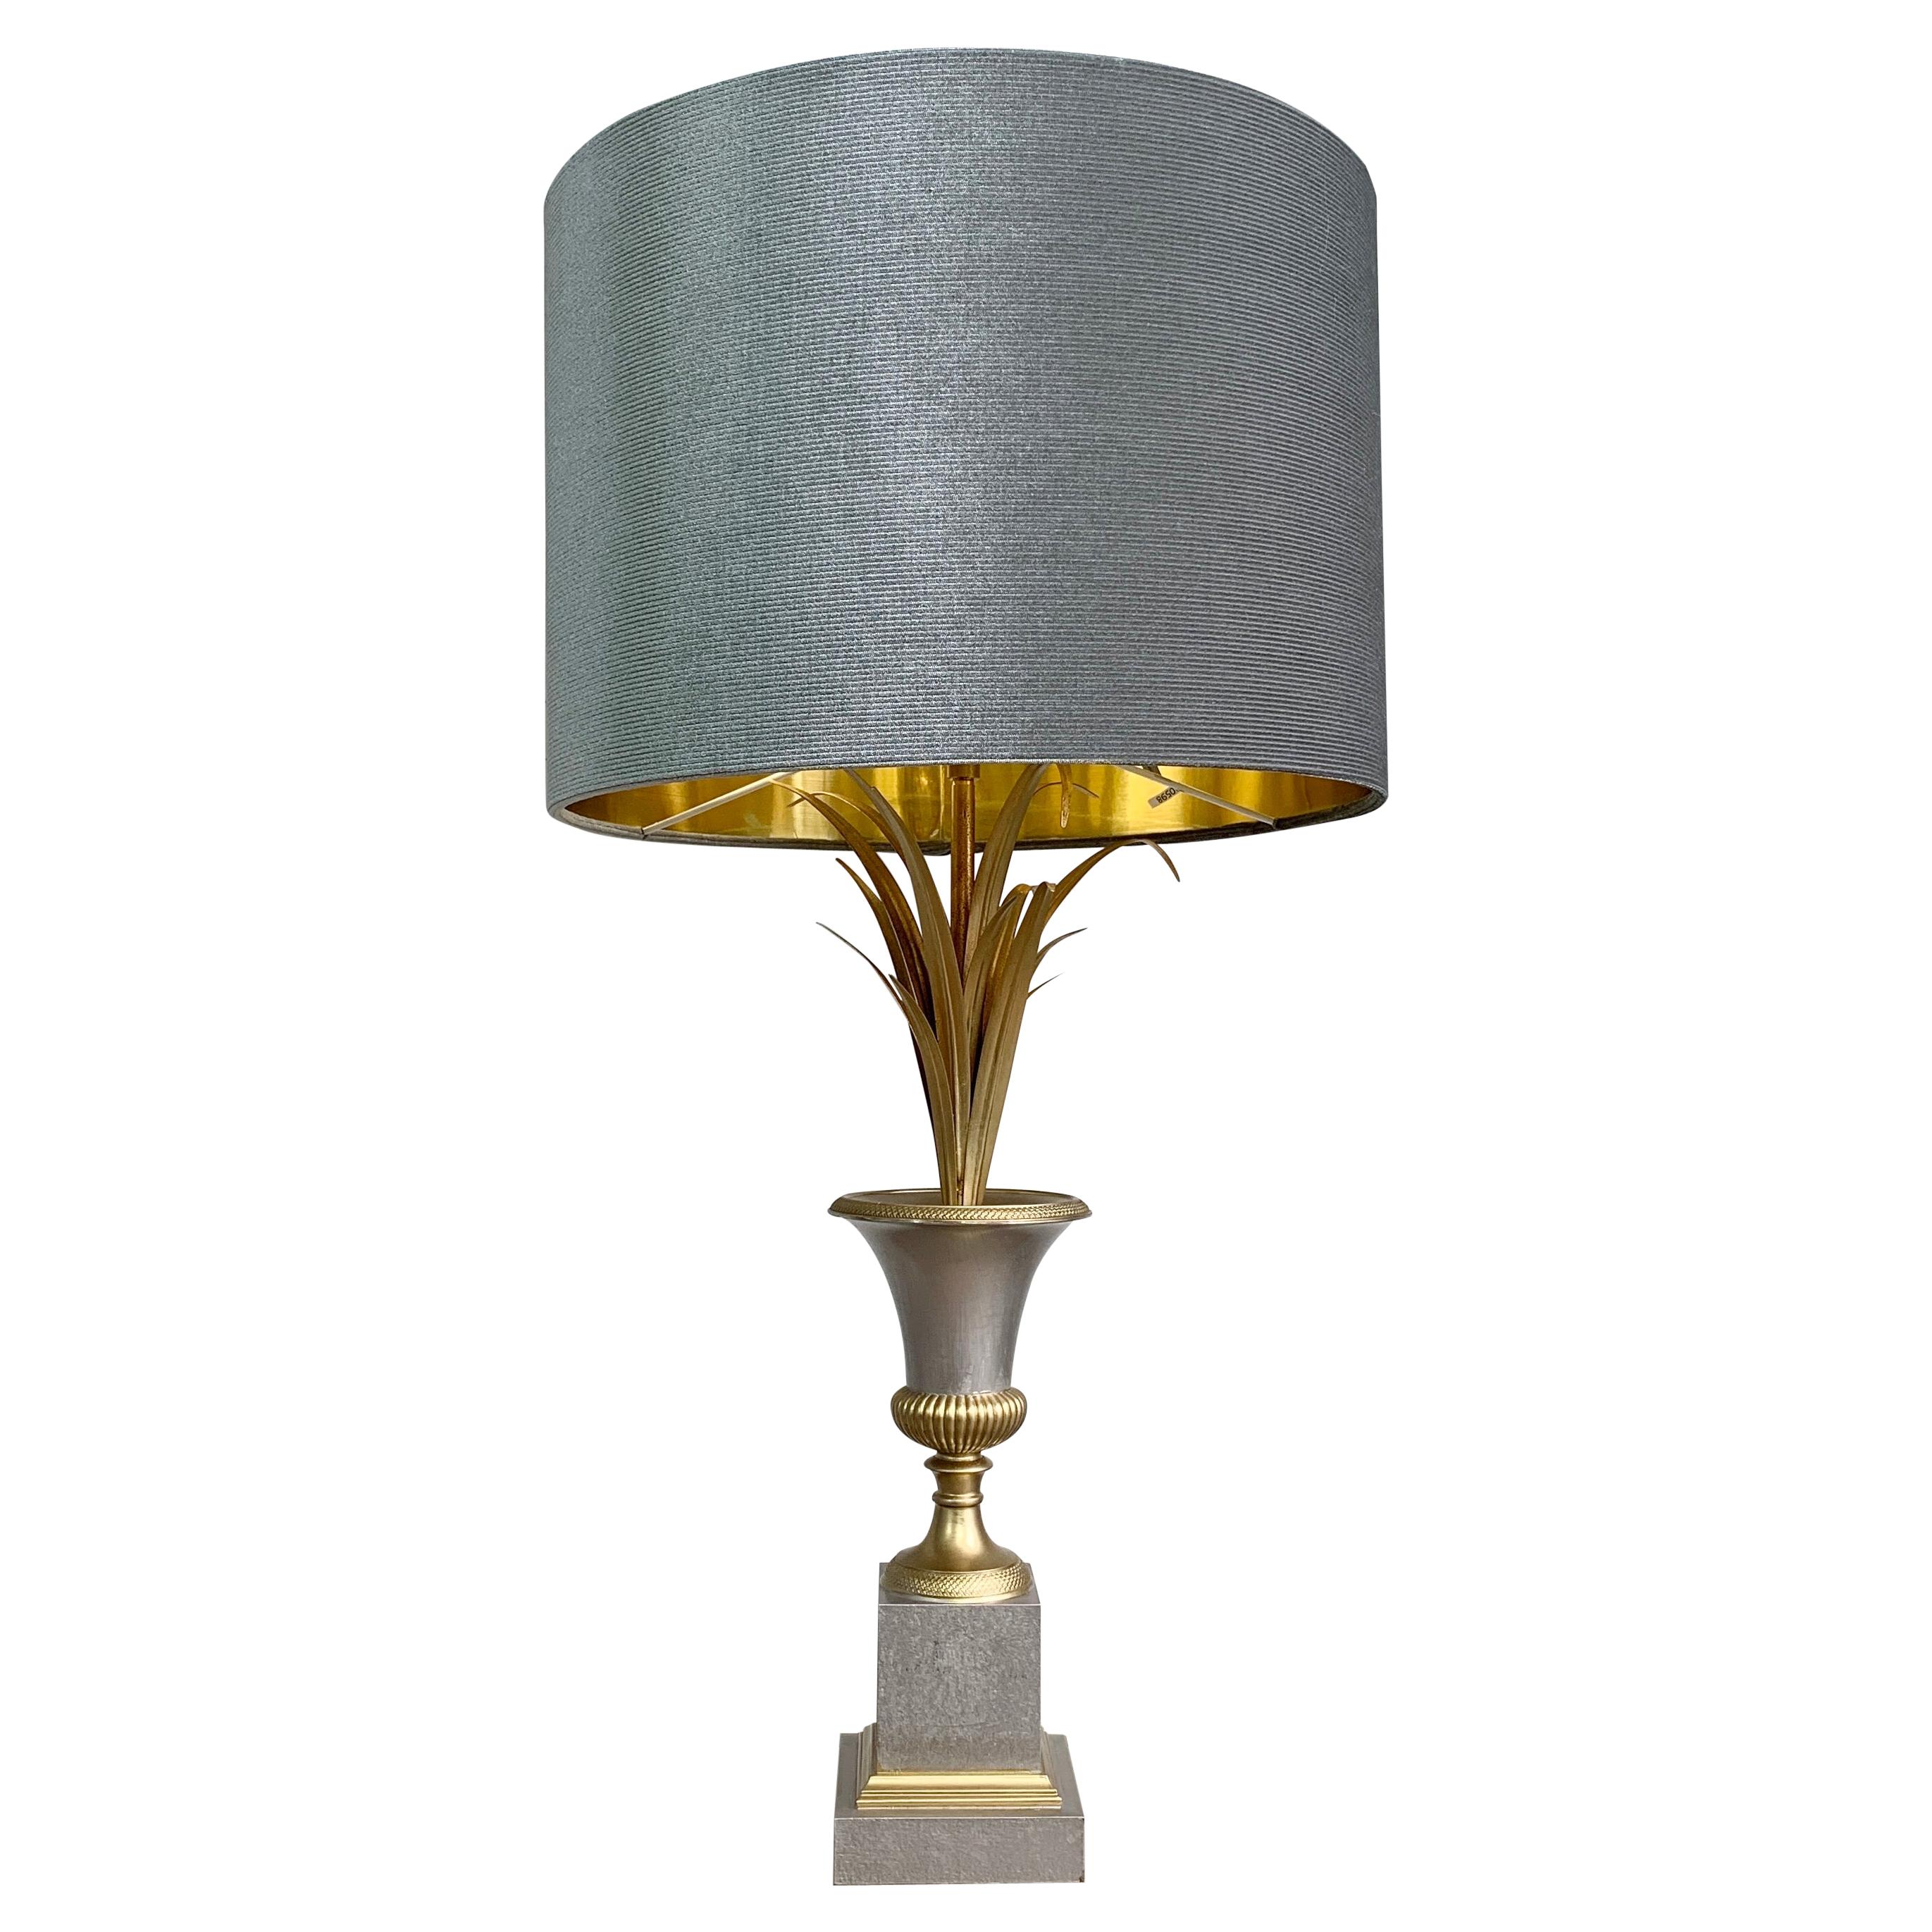 Maison Charles Vase Roseaux Silver and Gold Table Lamp